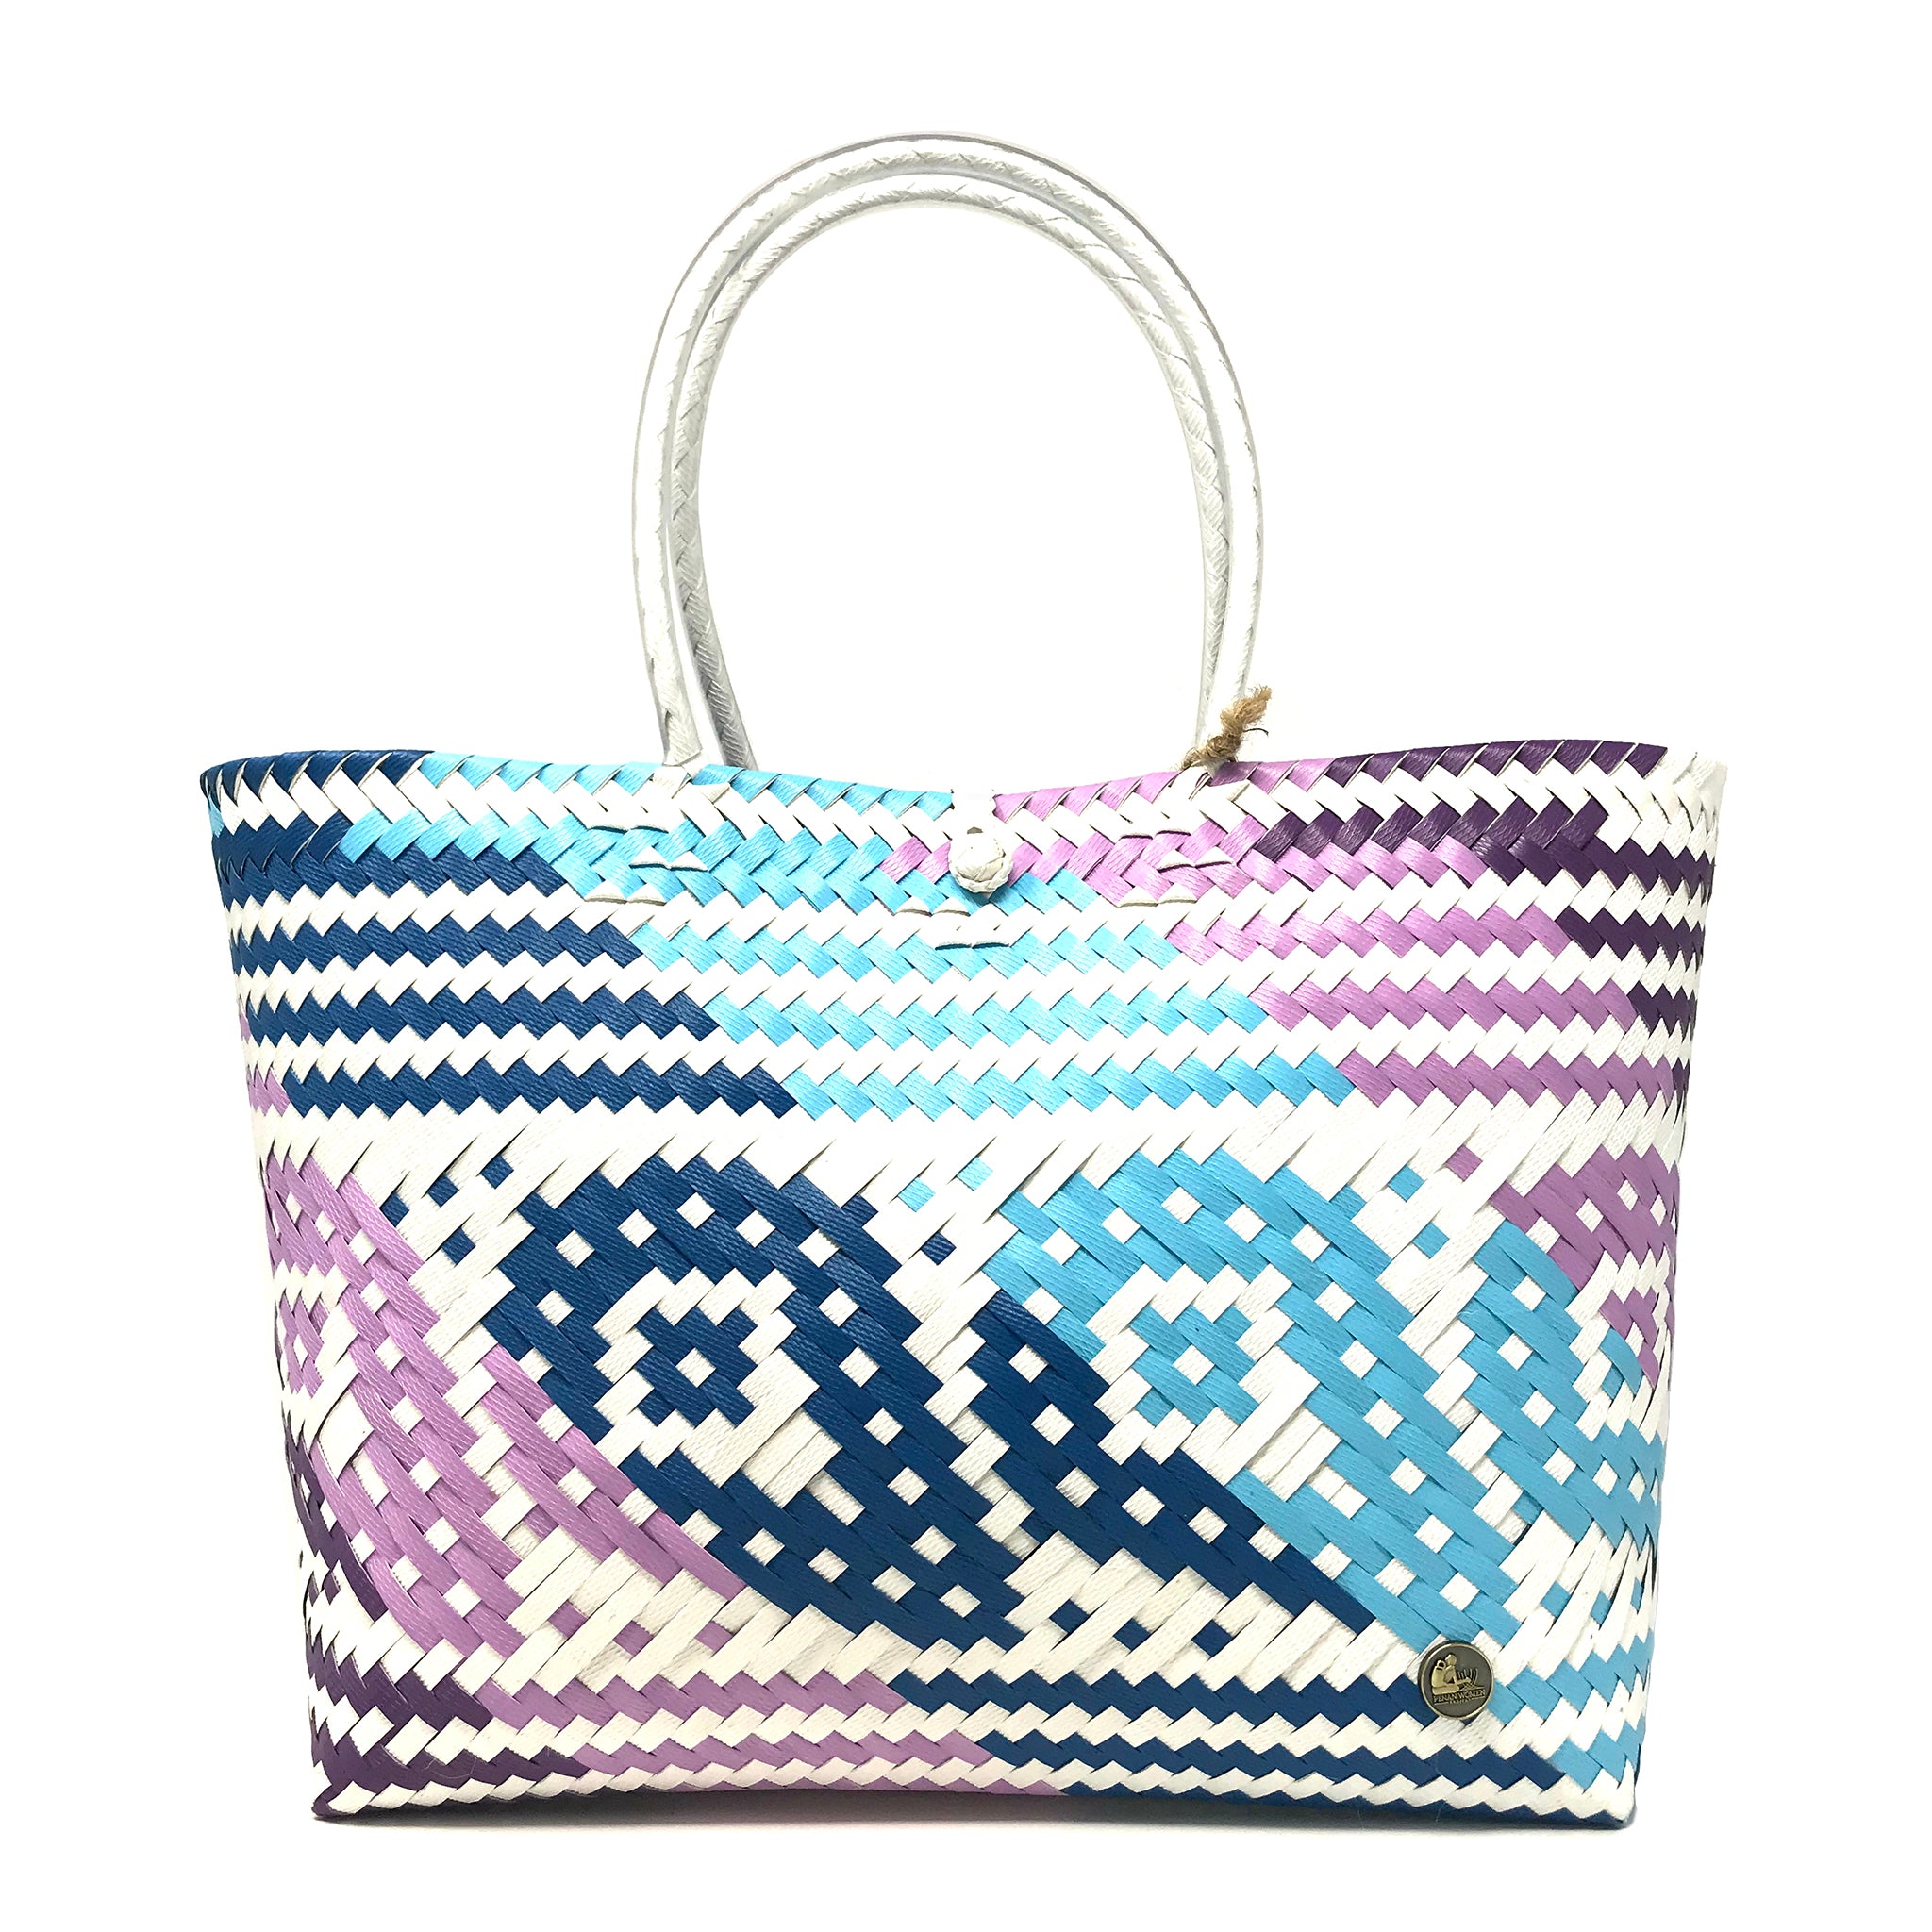 Blue, purple and white large size tote bag facing the front.